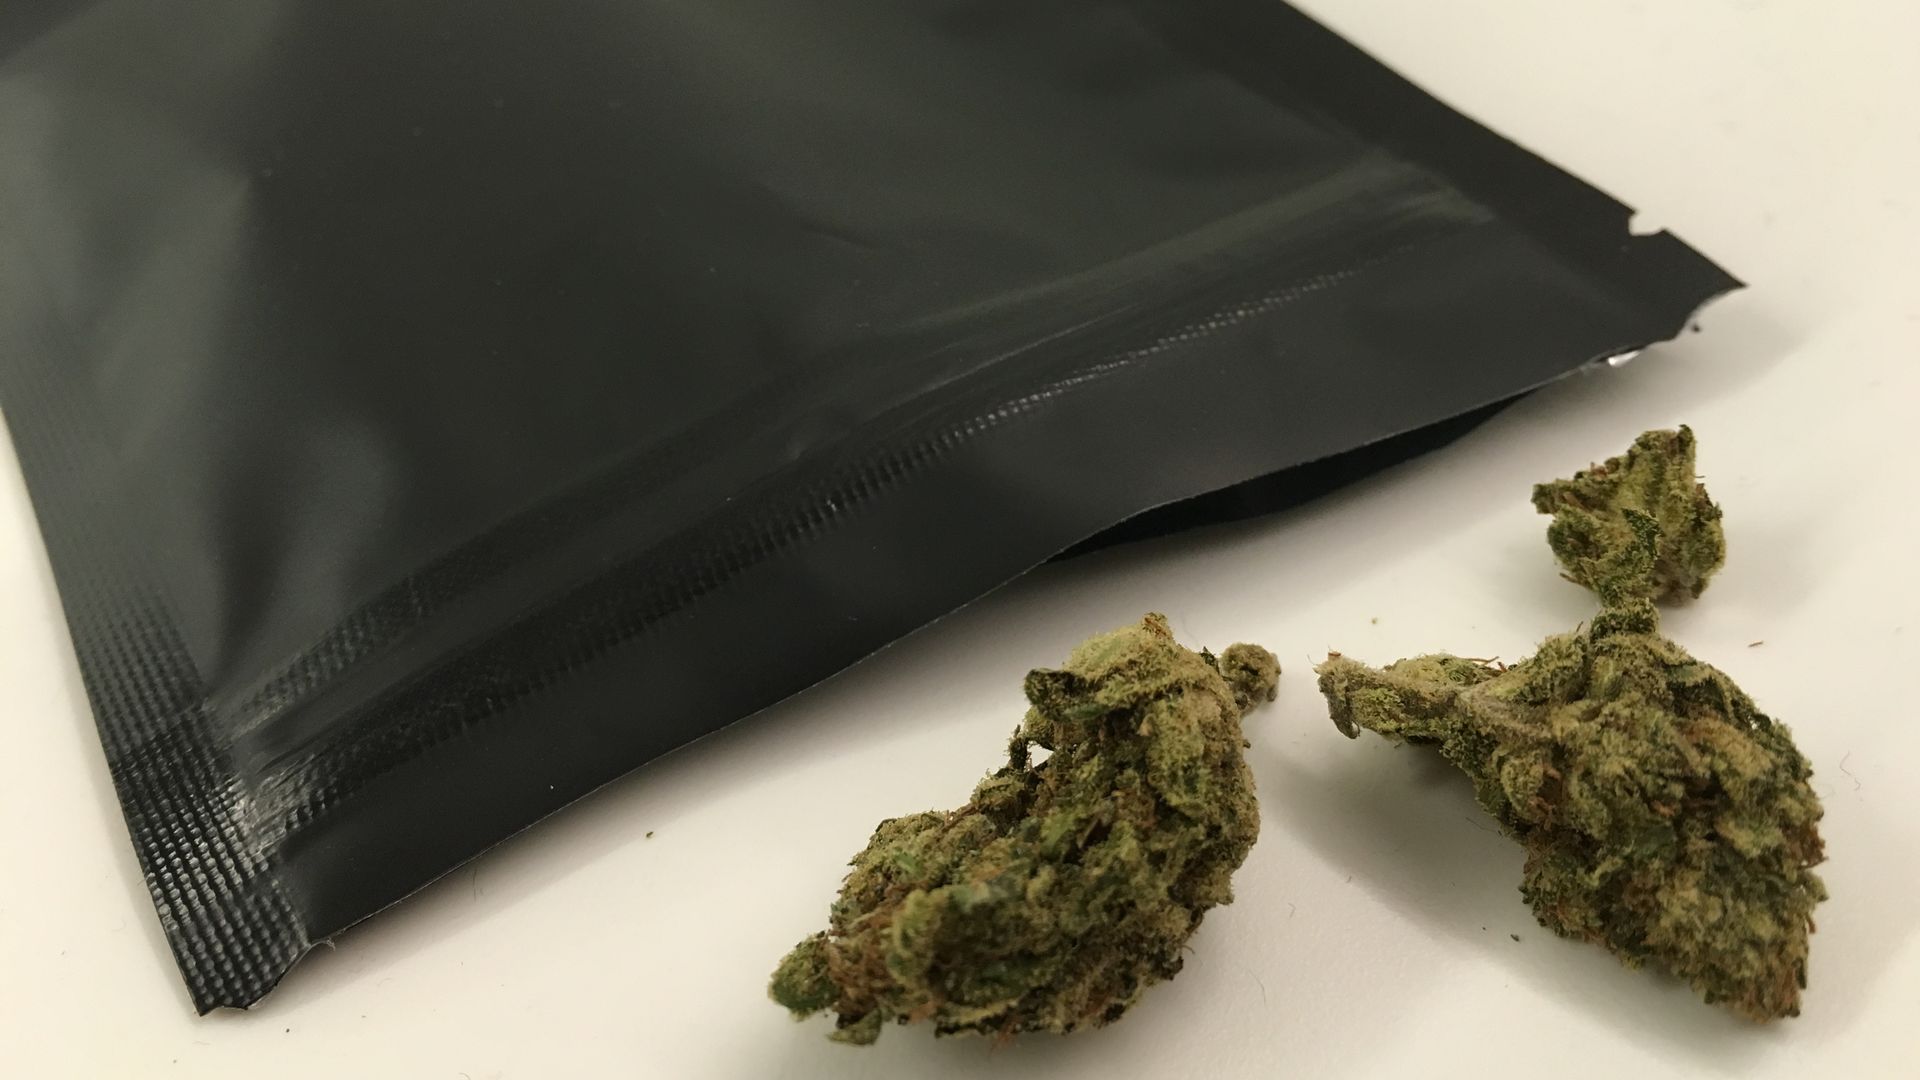 Marijuana buds coming out of a black plastic package